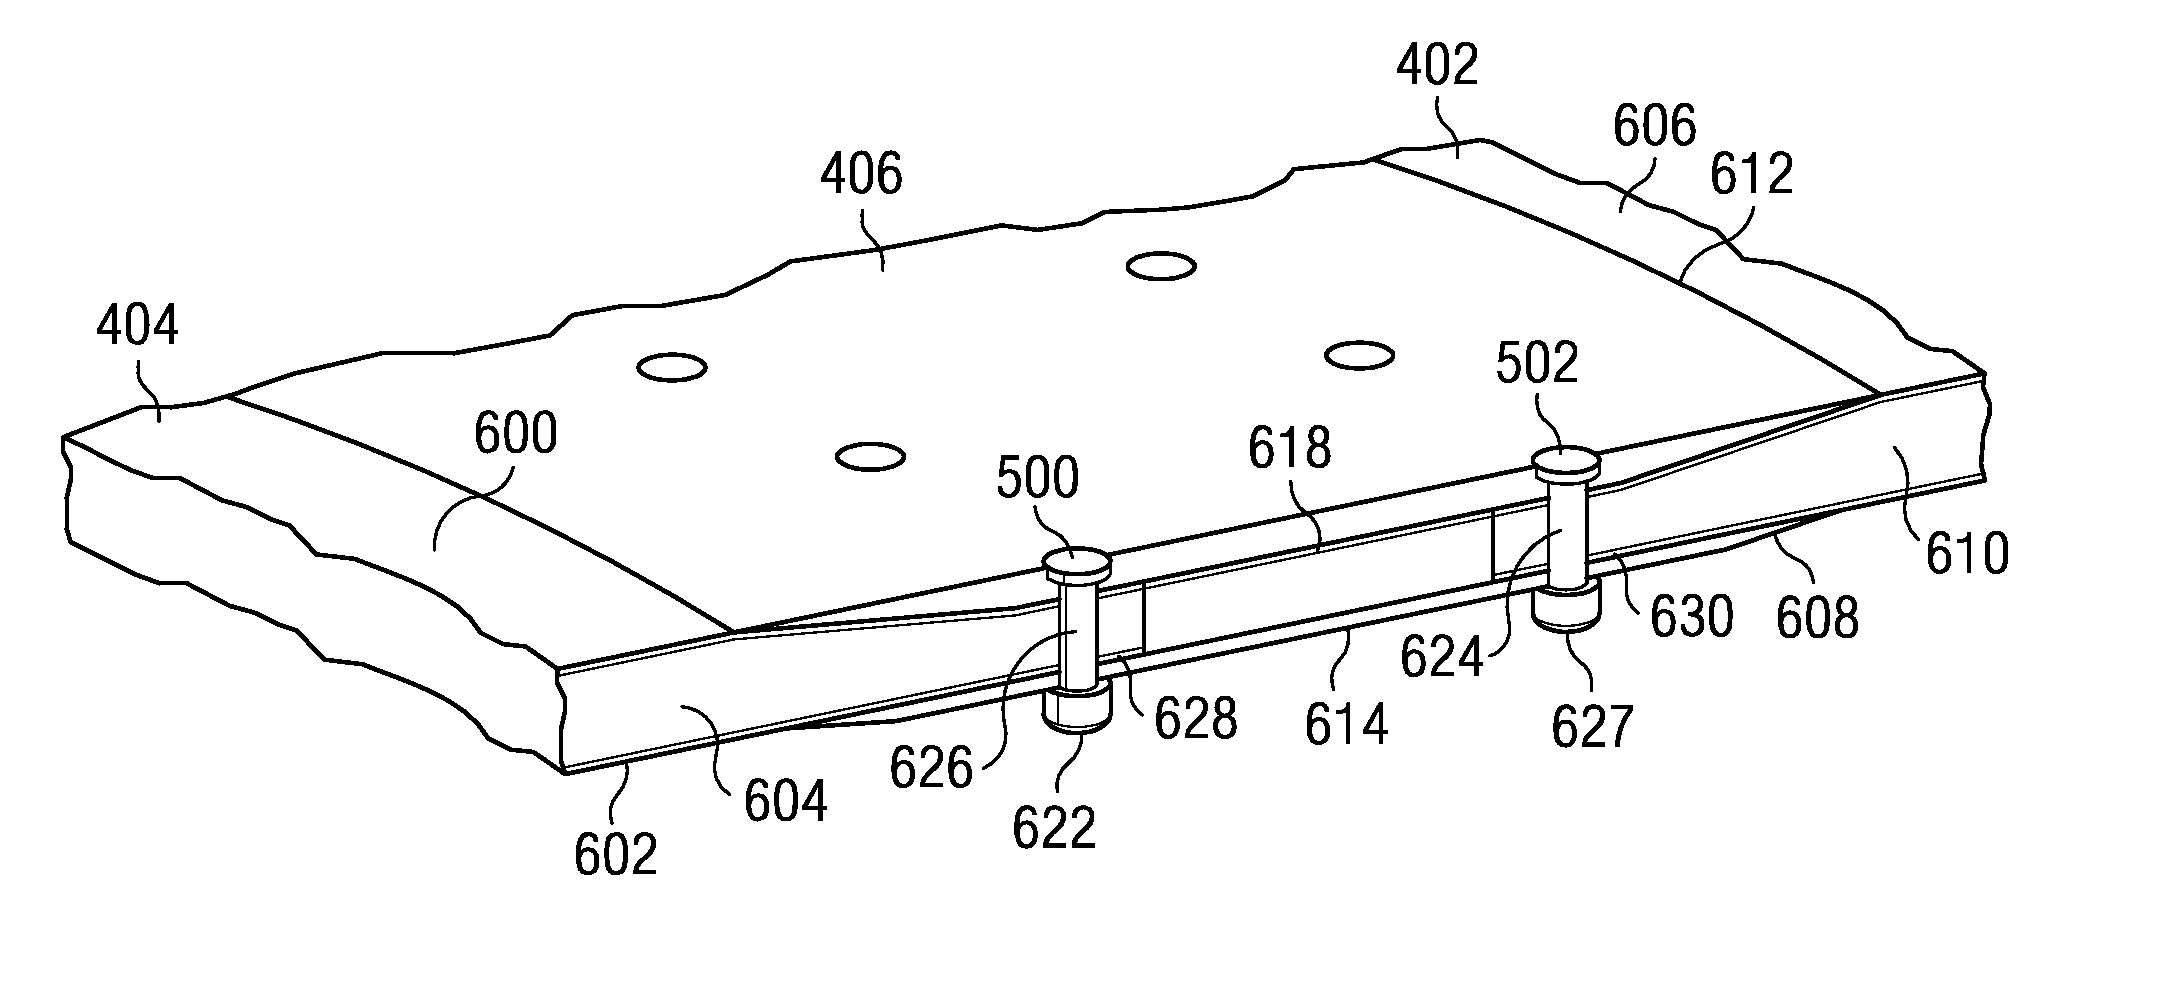 Method and apparatus for reinforcing composite structures